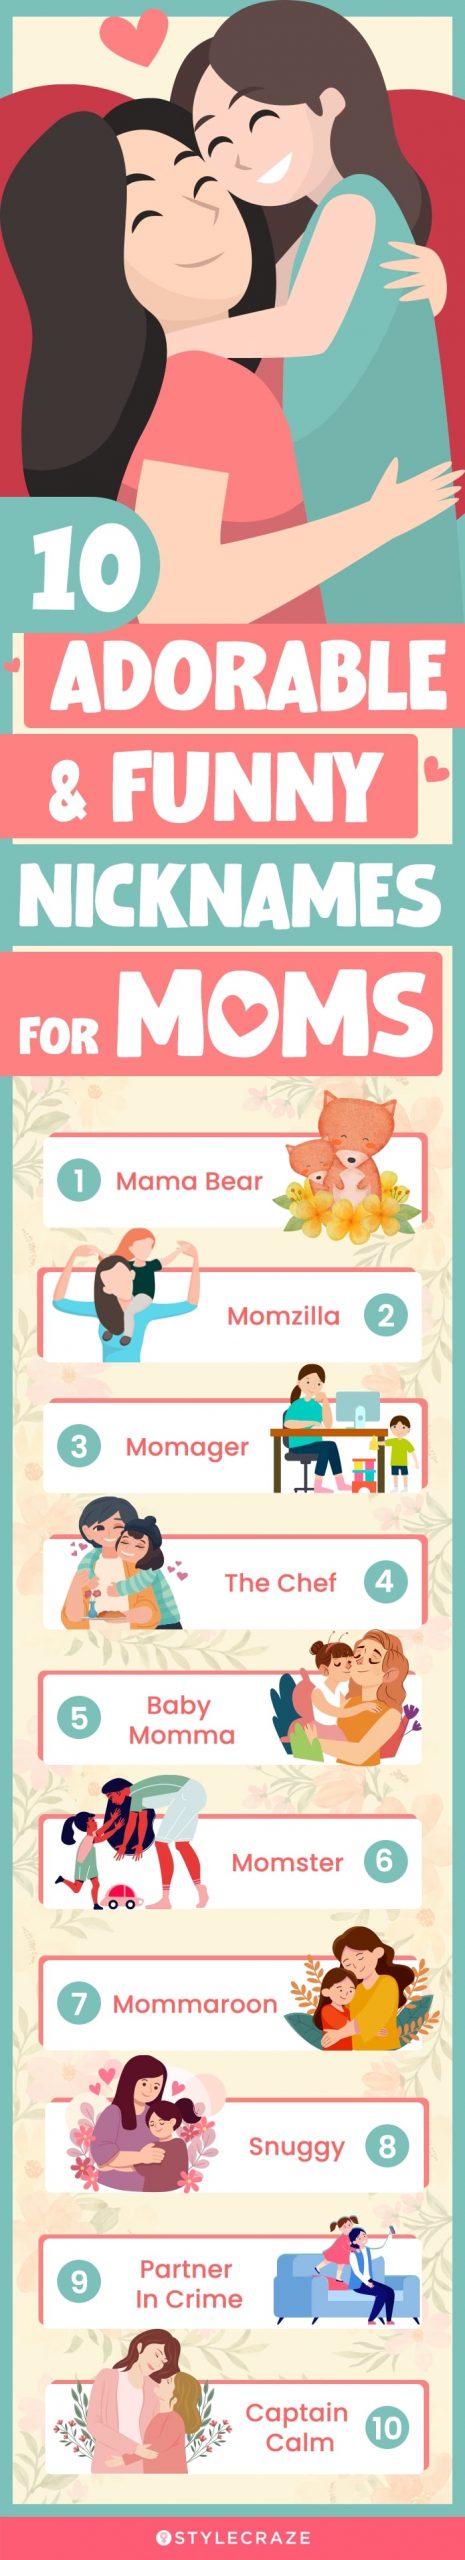 10 adorable and funny nicknames for moms (infographic)